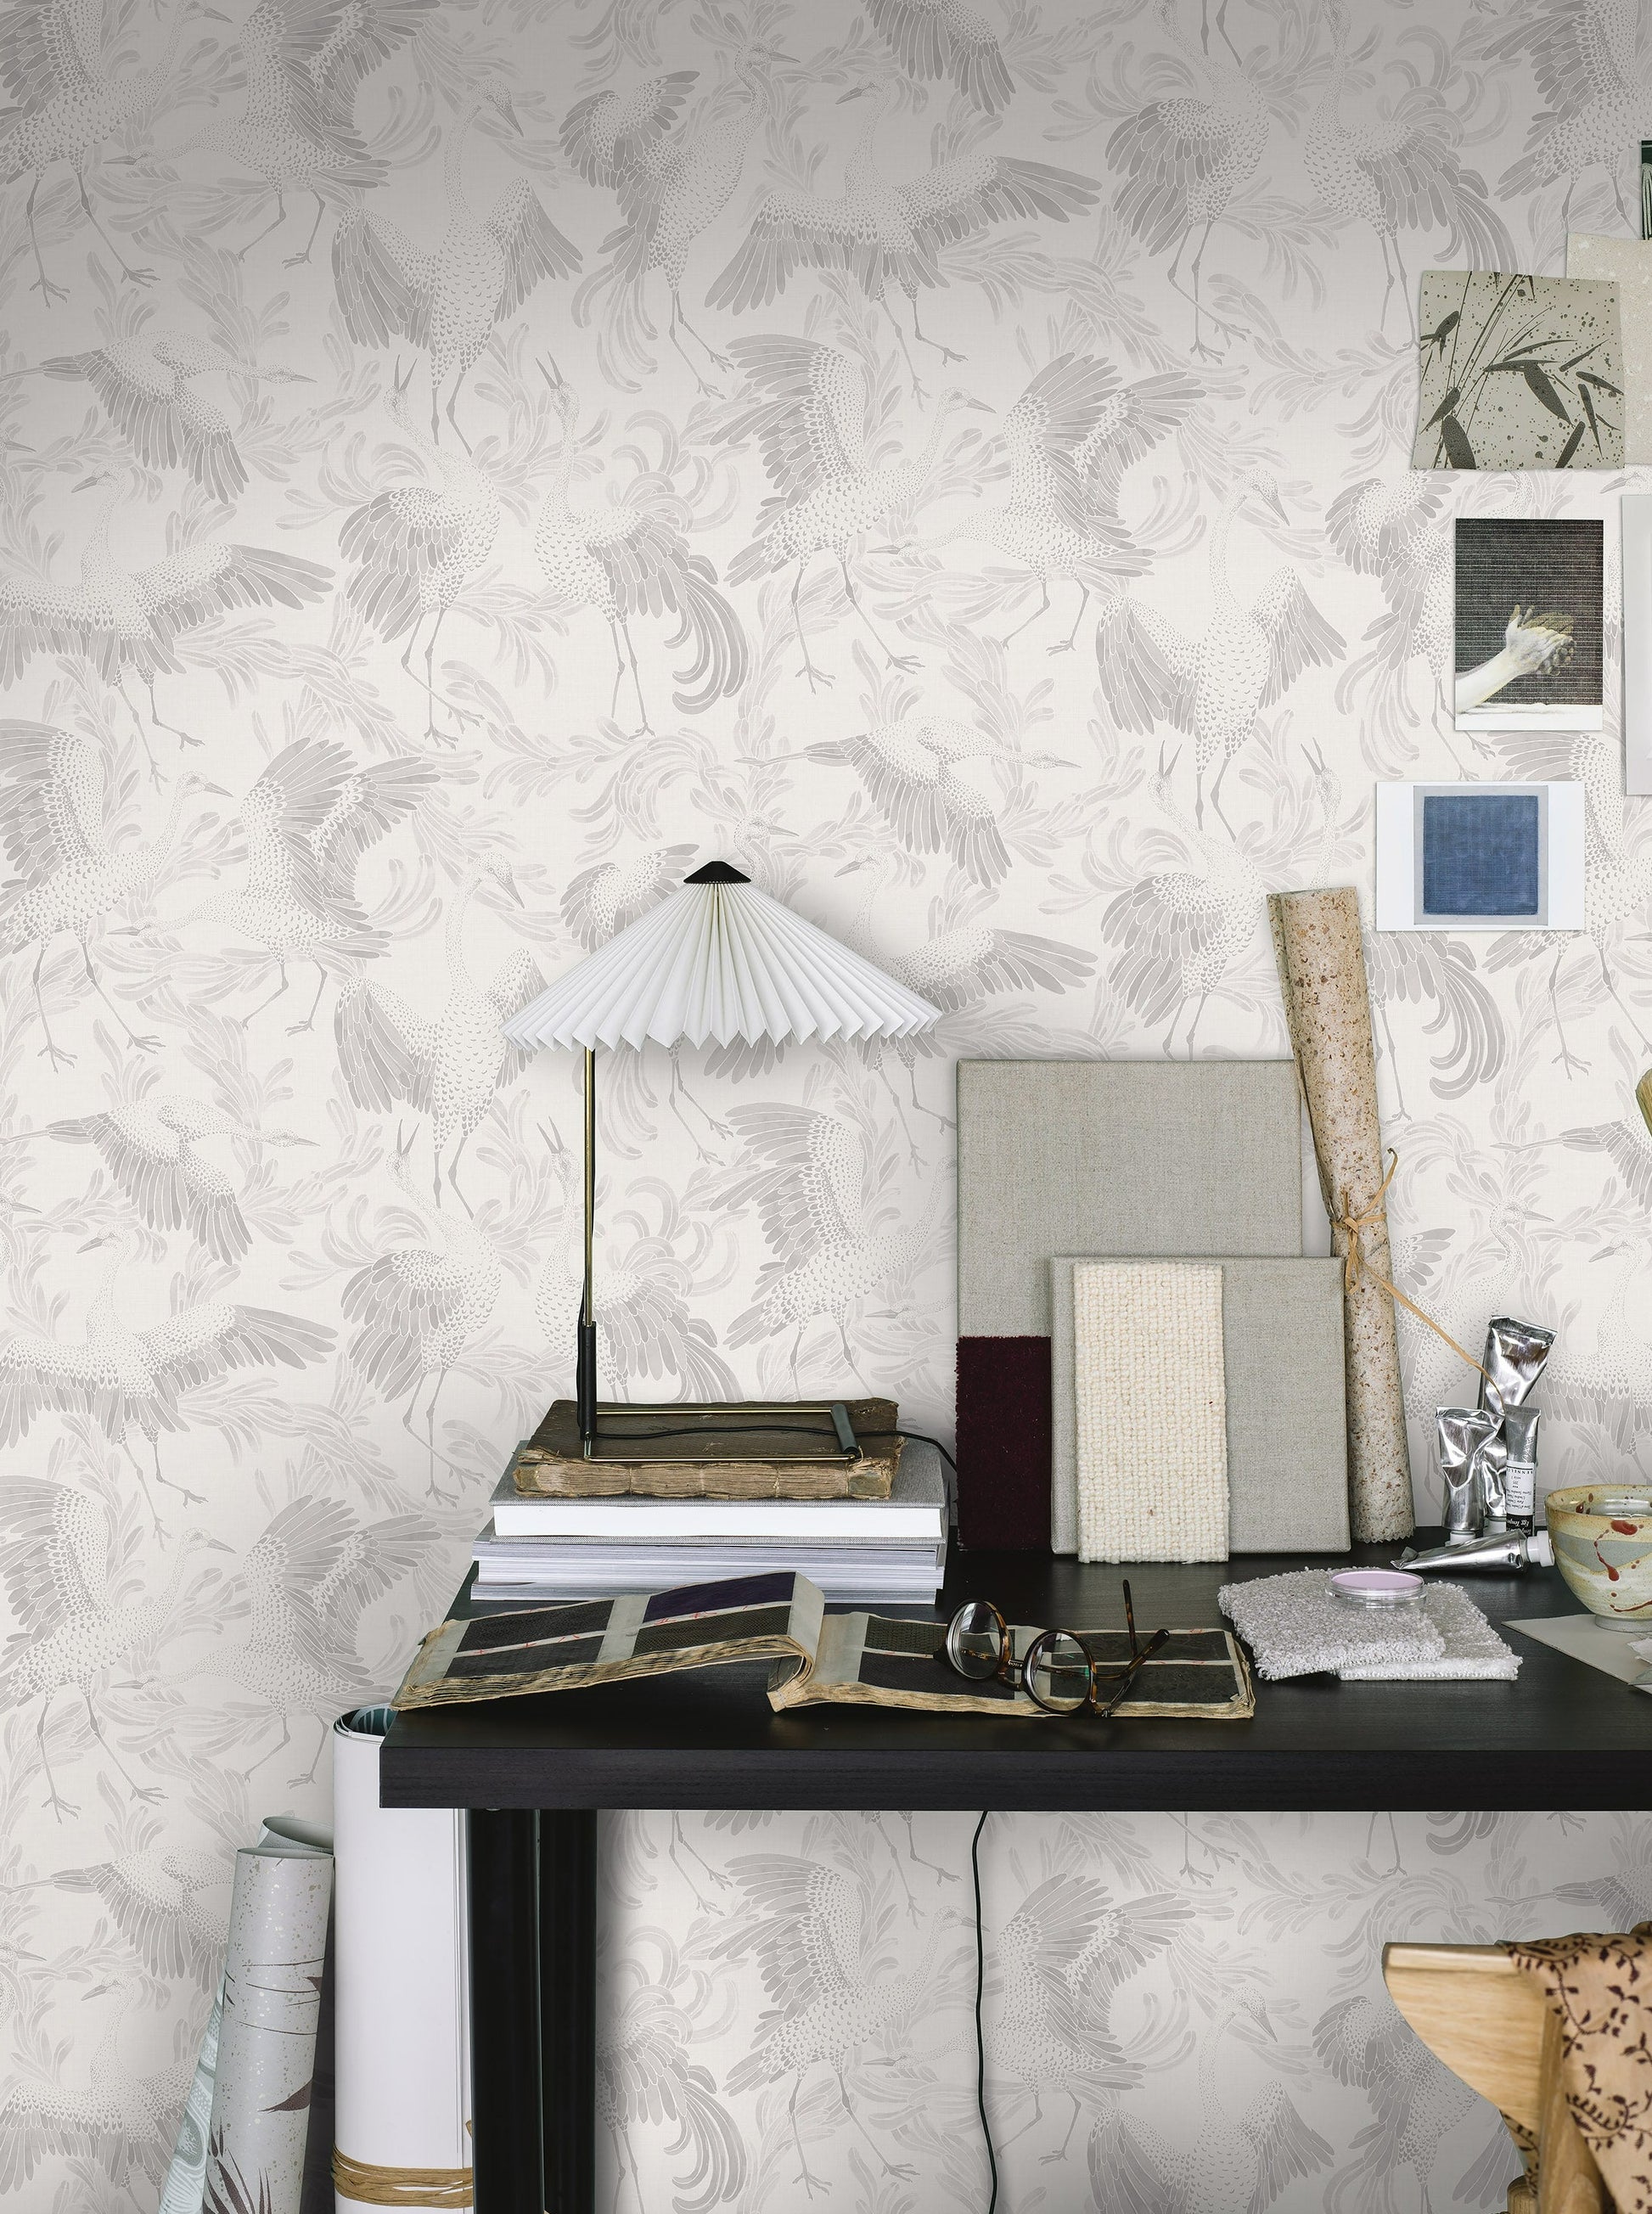 Coloured in authentically age-faded shades of white, sepia and beige, our Dancing Crane wallpaper adds a touch of vintage elegance to the interiors it adorns. 